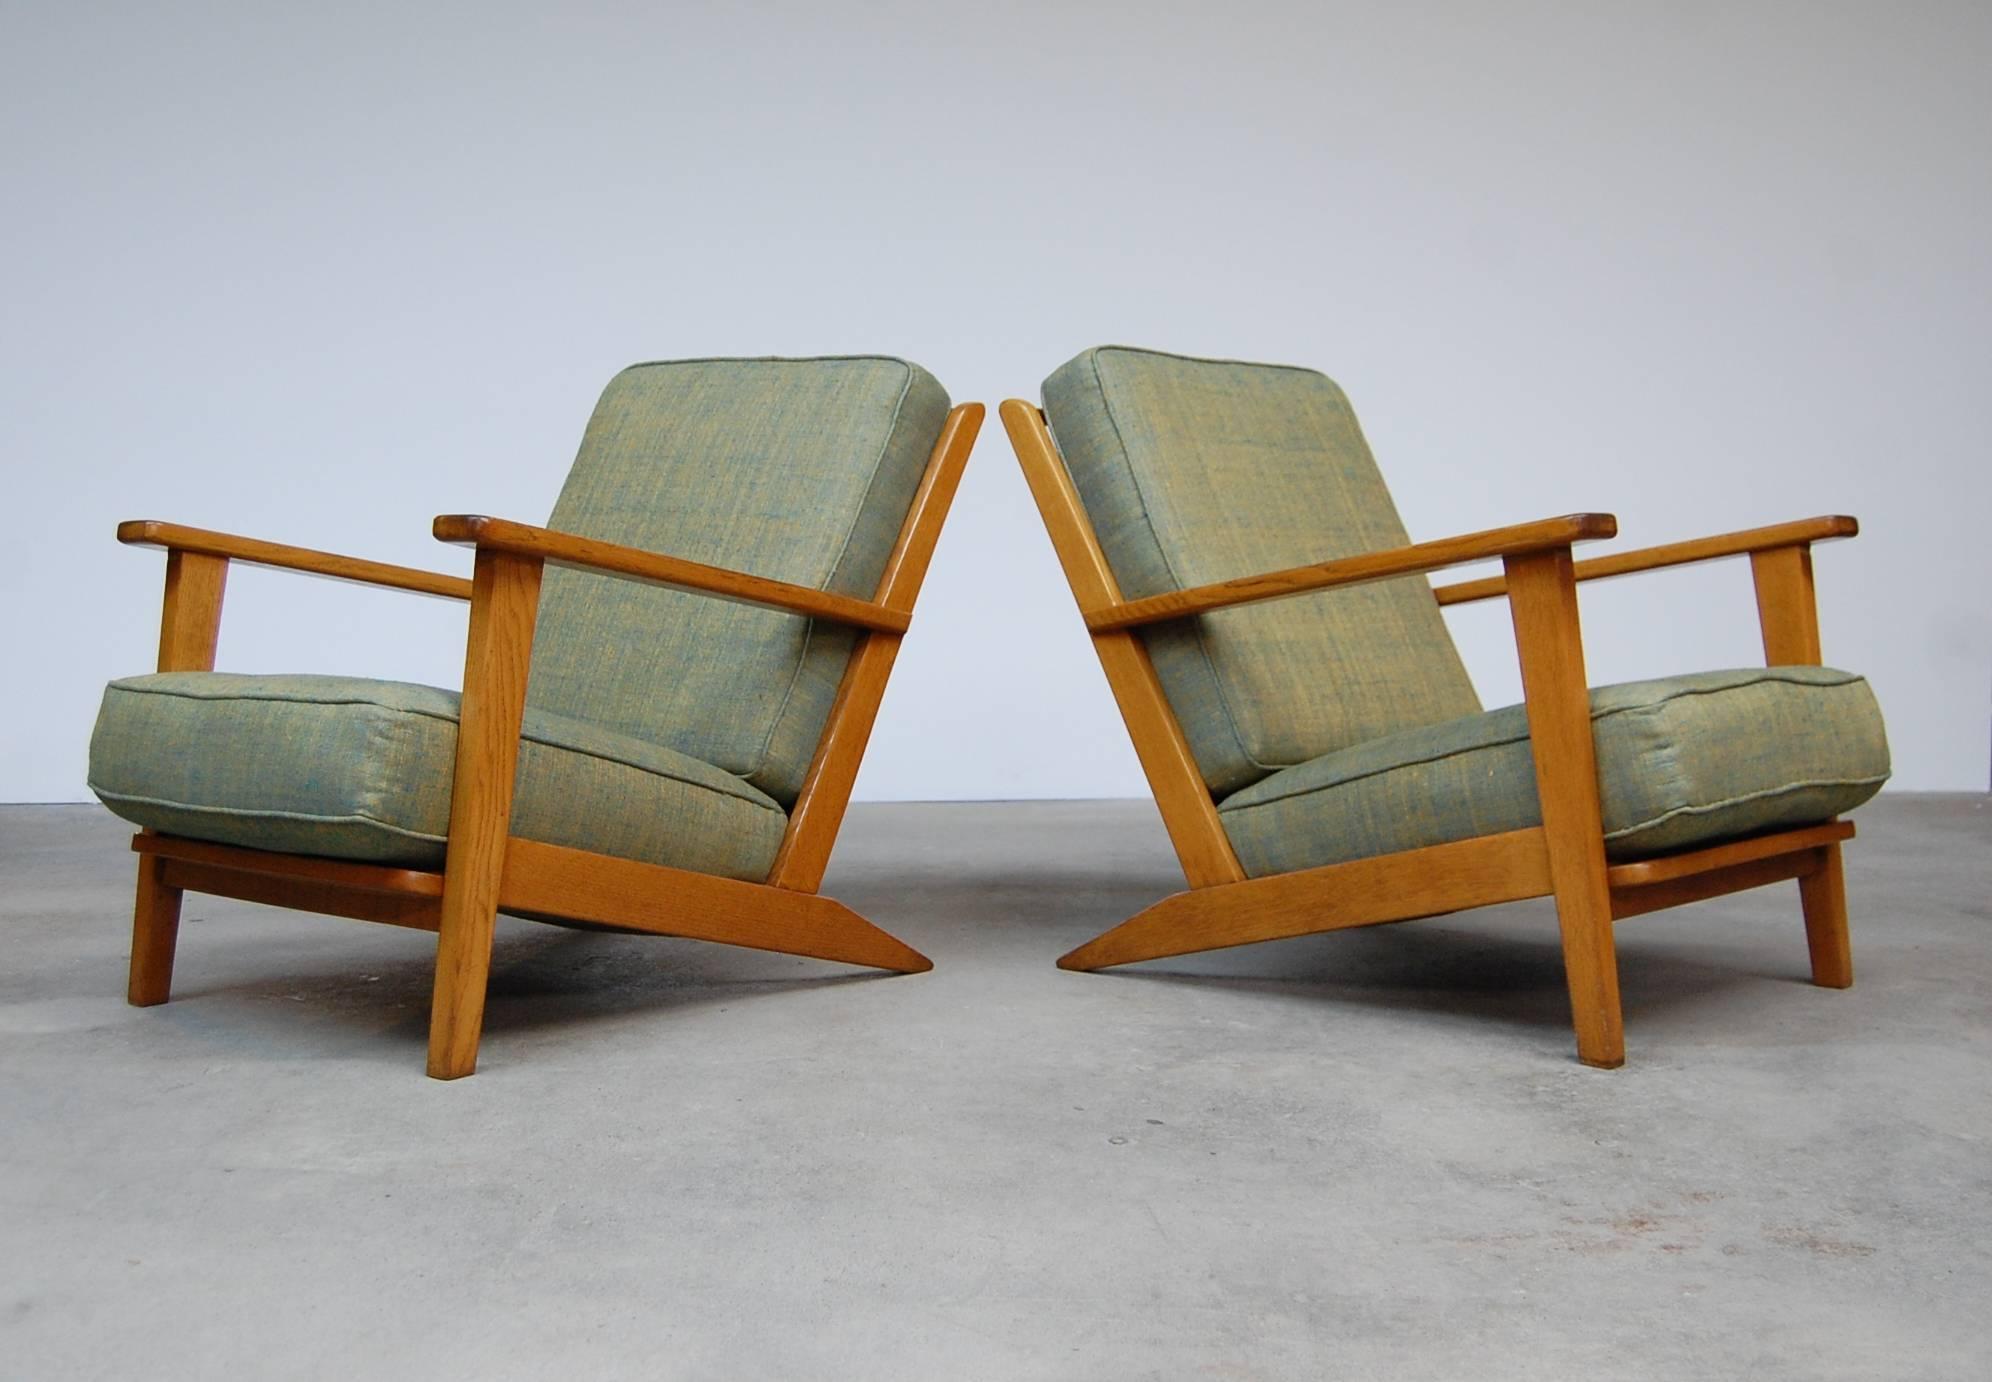 Pair of low lounge chairs in oak from France, circa 1950. Chairs have loose cushions and have been reupholstered in raw silk. Coil springs have been wrapped in silk as well, just as they originally were. Seat cushions have internal springs. Very